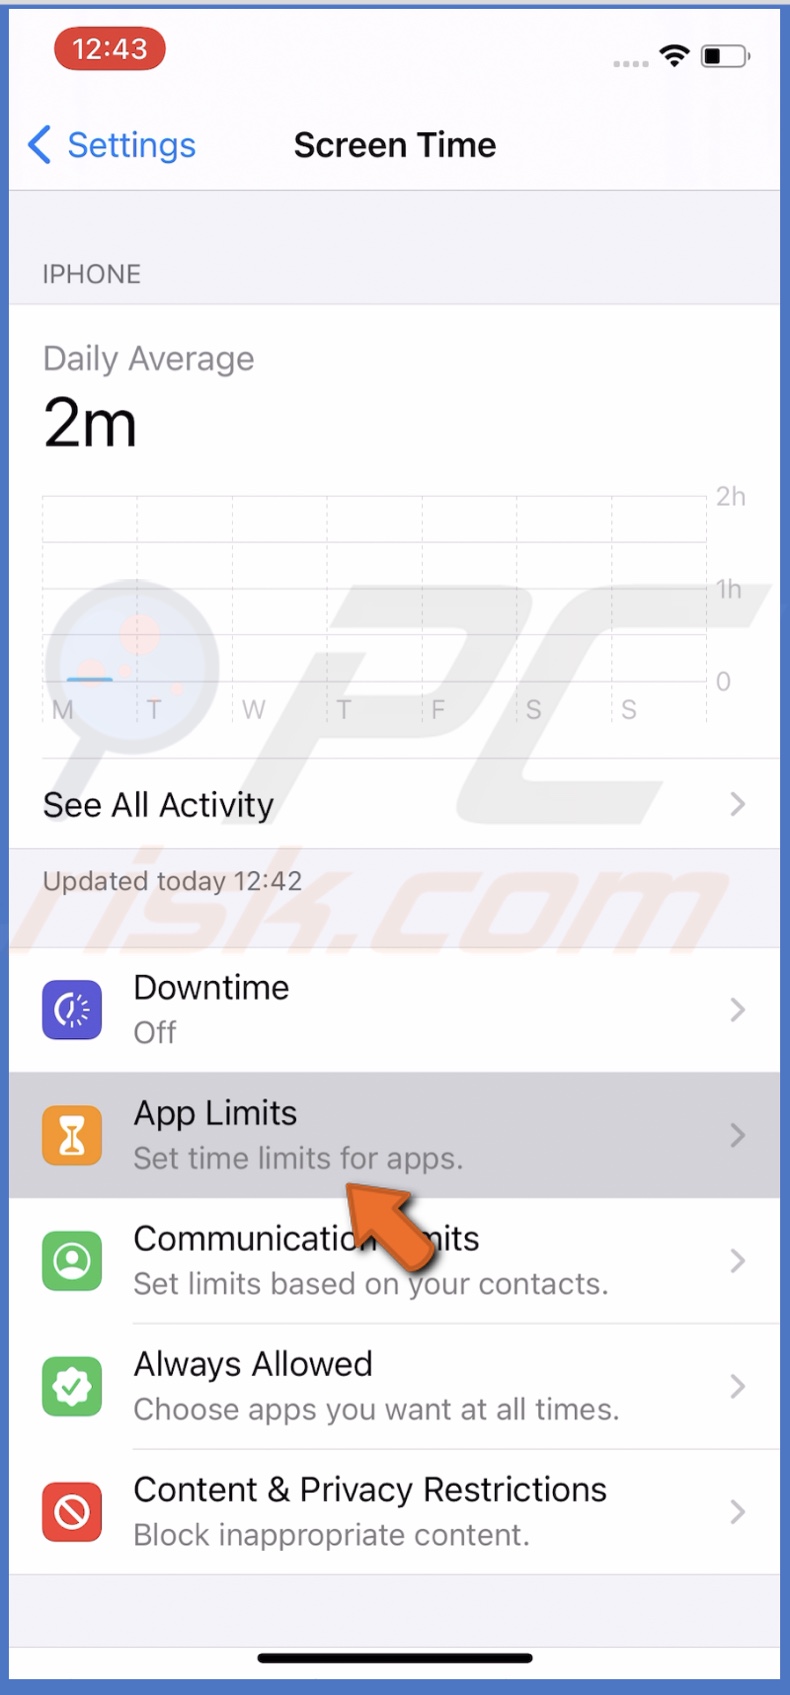 Go to App Limits in iOS